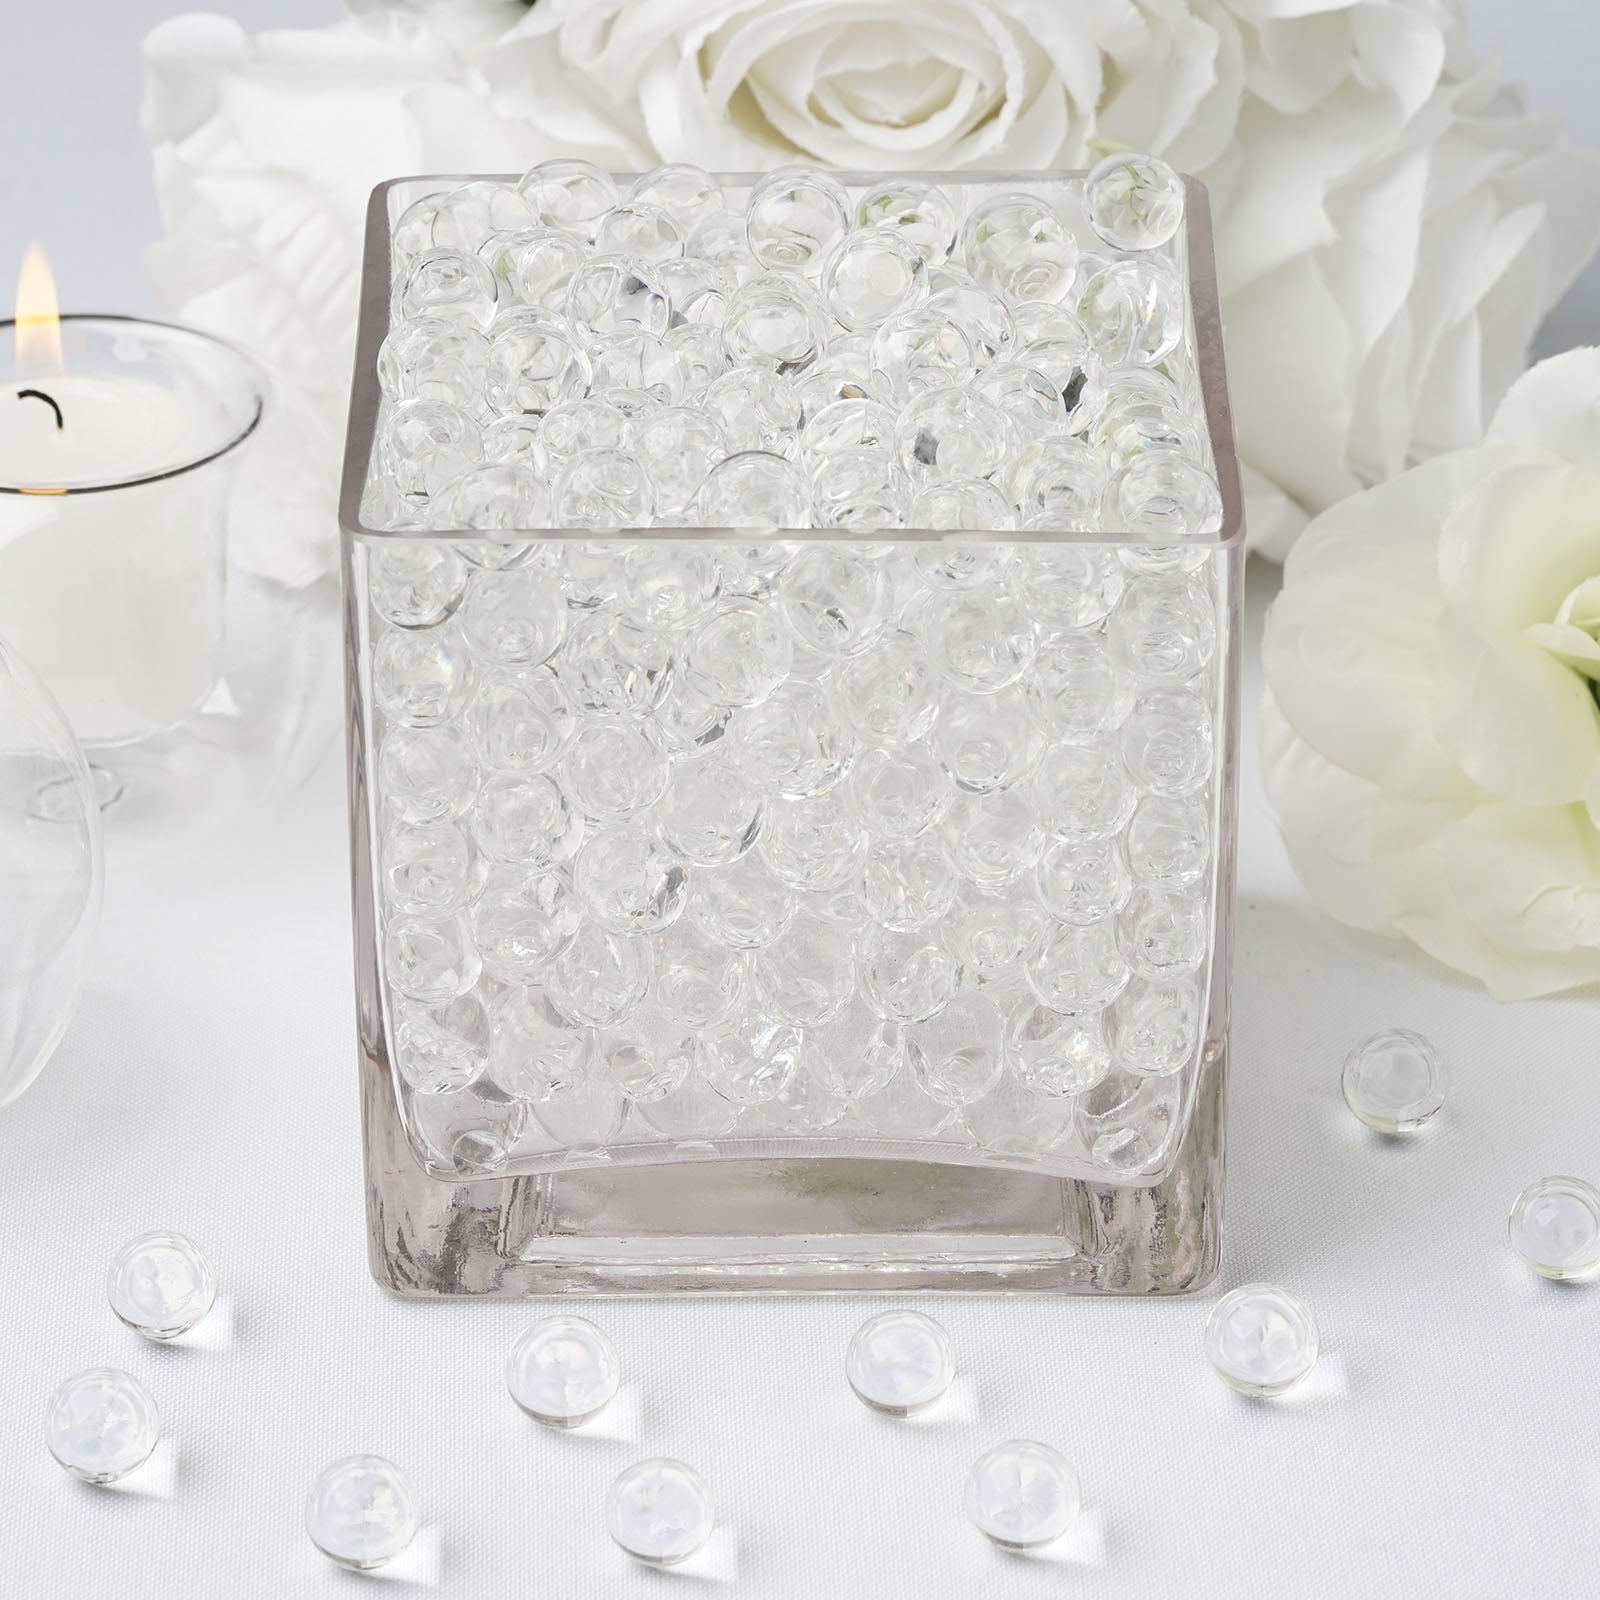 200 To 250 PCS  Clear Small Round Deco Water Beads Jelly Vase